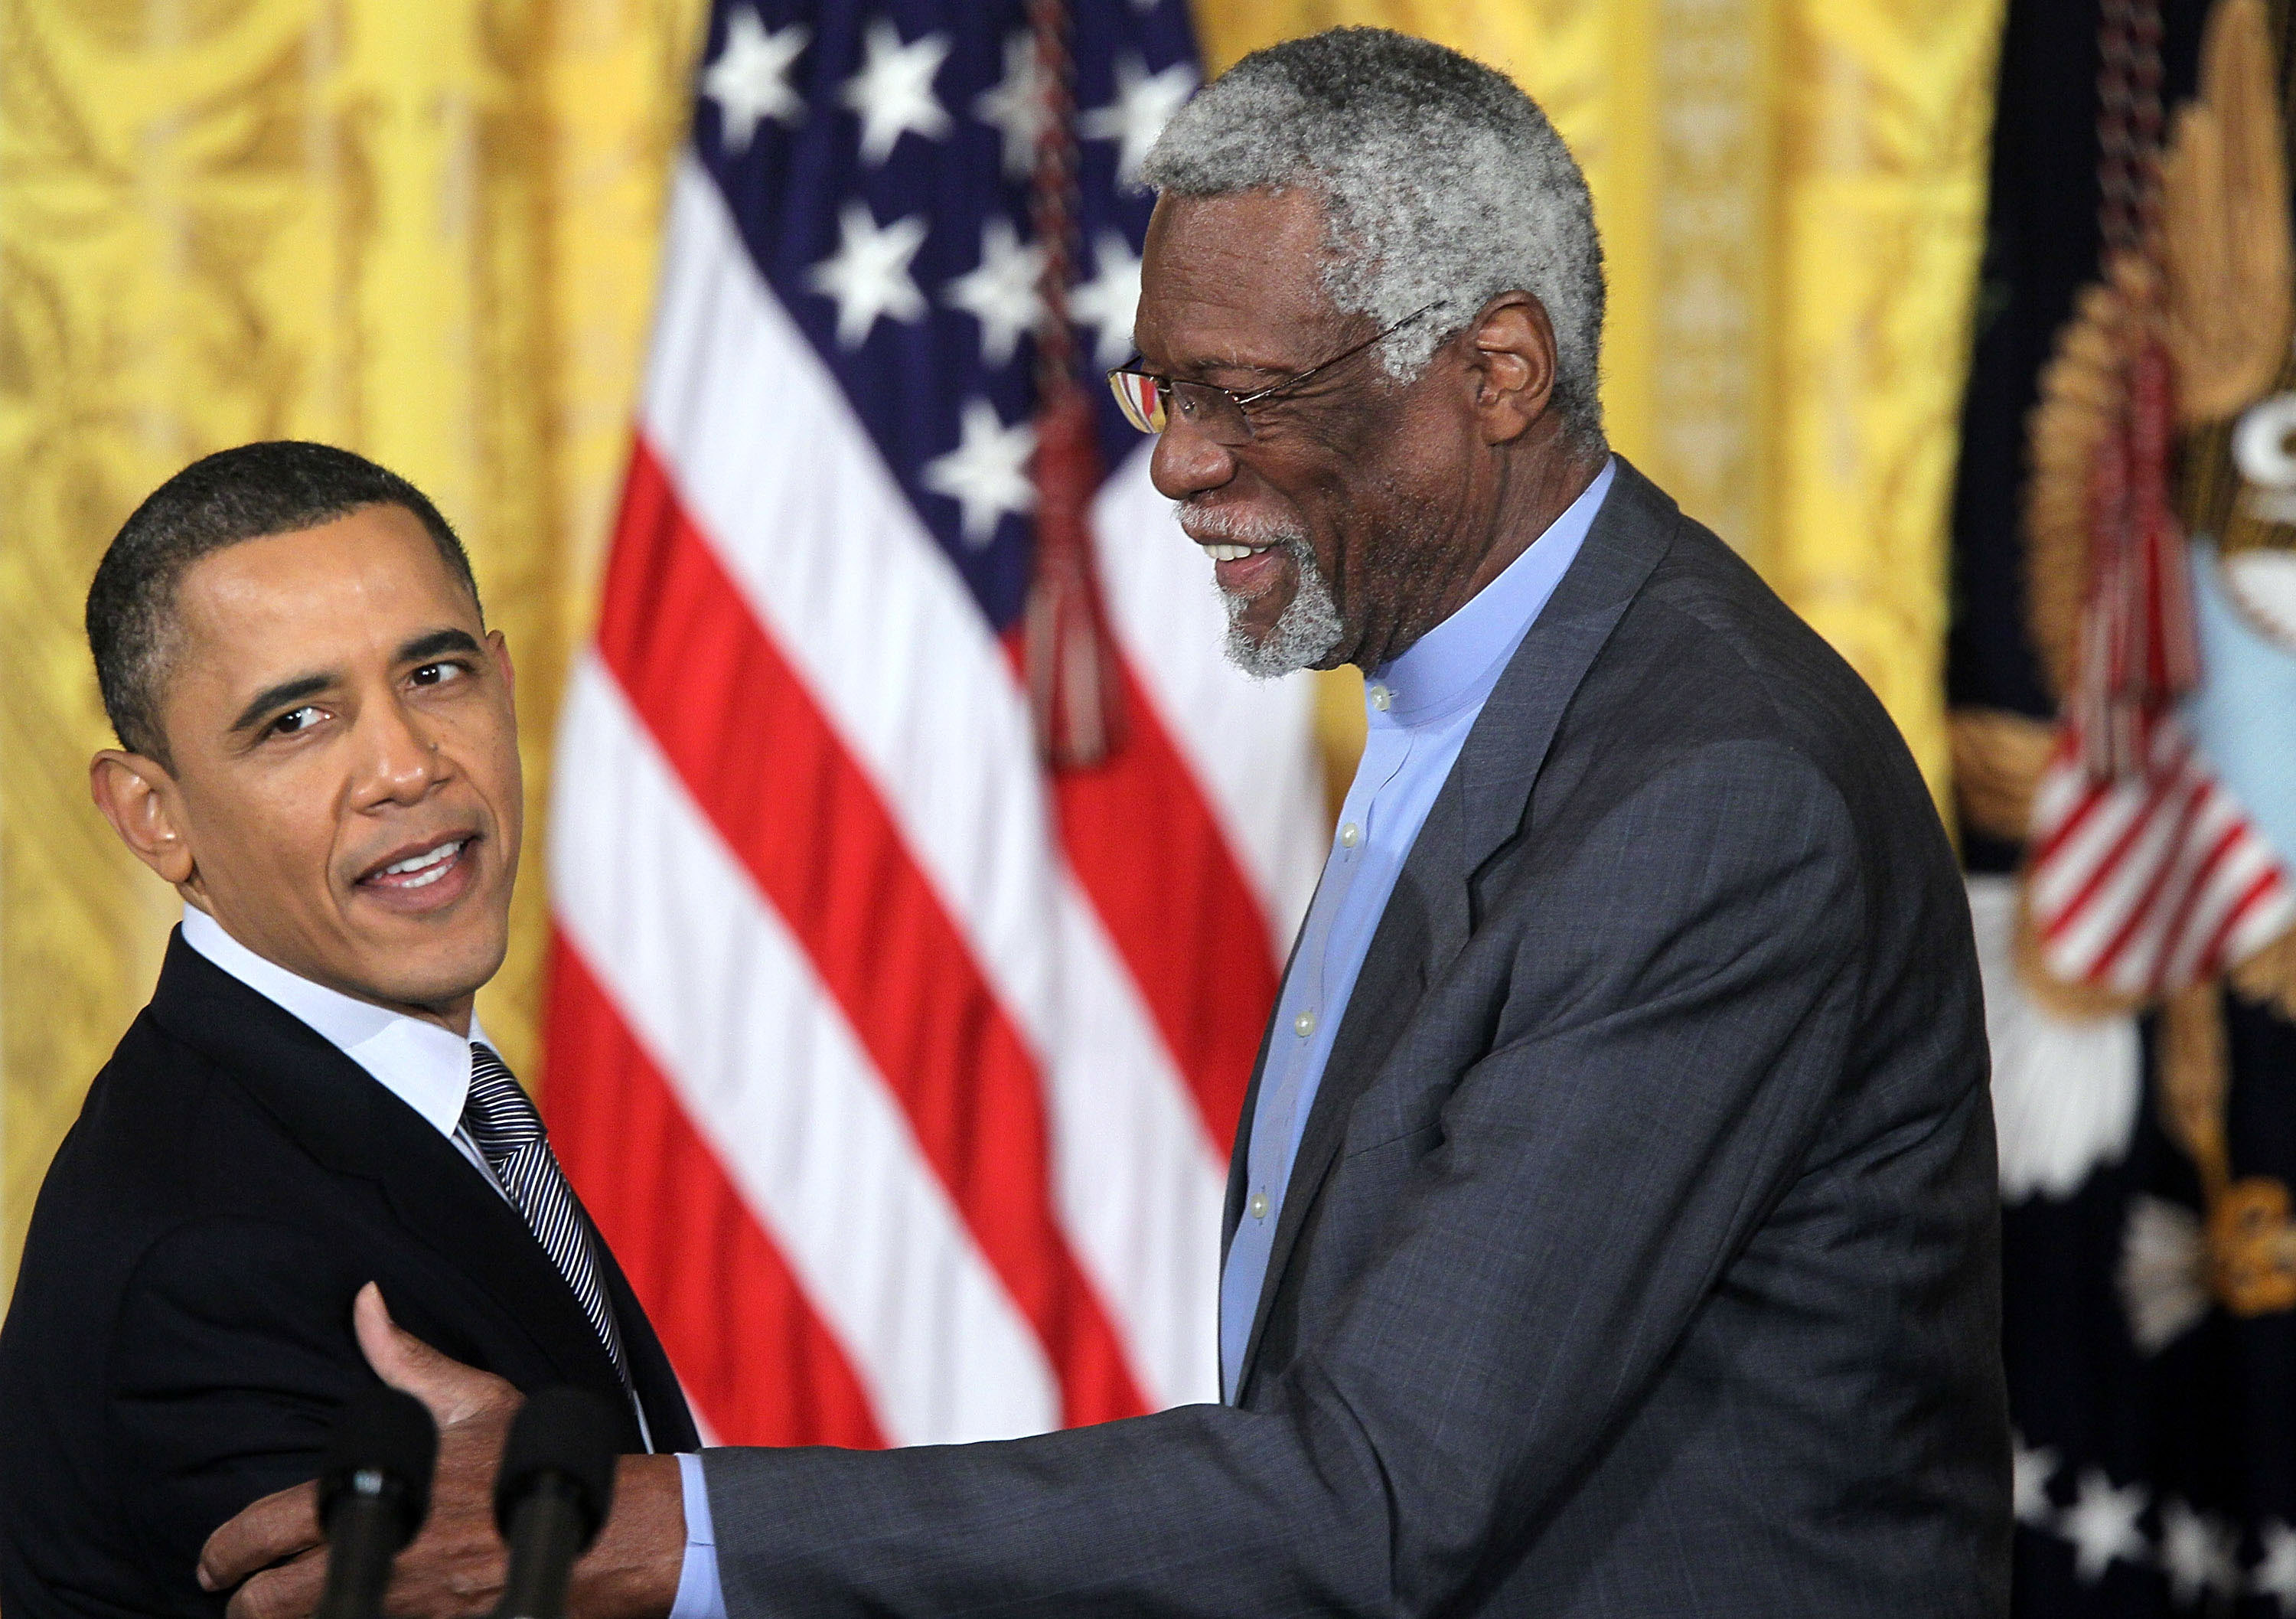 WASHINGTON, DC - FEBRUARY 15:  Former Boston Celtics captain Bill Russell (R) shares a moment with U.S. President Barack Obama during the 2010 Medal of Freedom presentation ceremony at the East Room of the White House February 15, 2011 in Washington, DC.